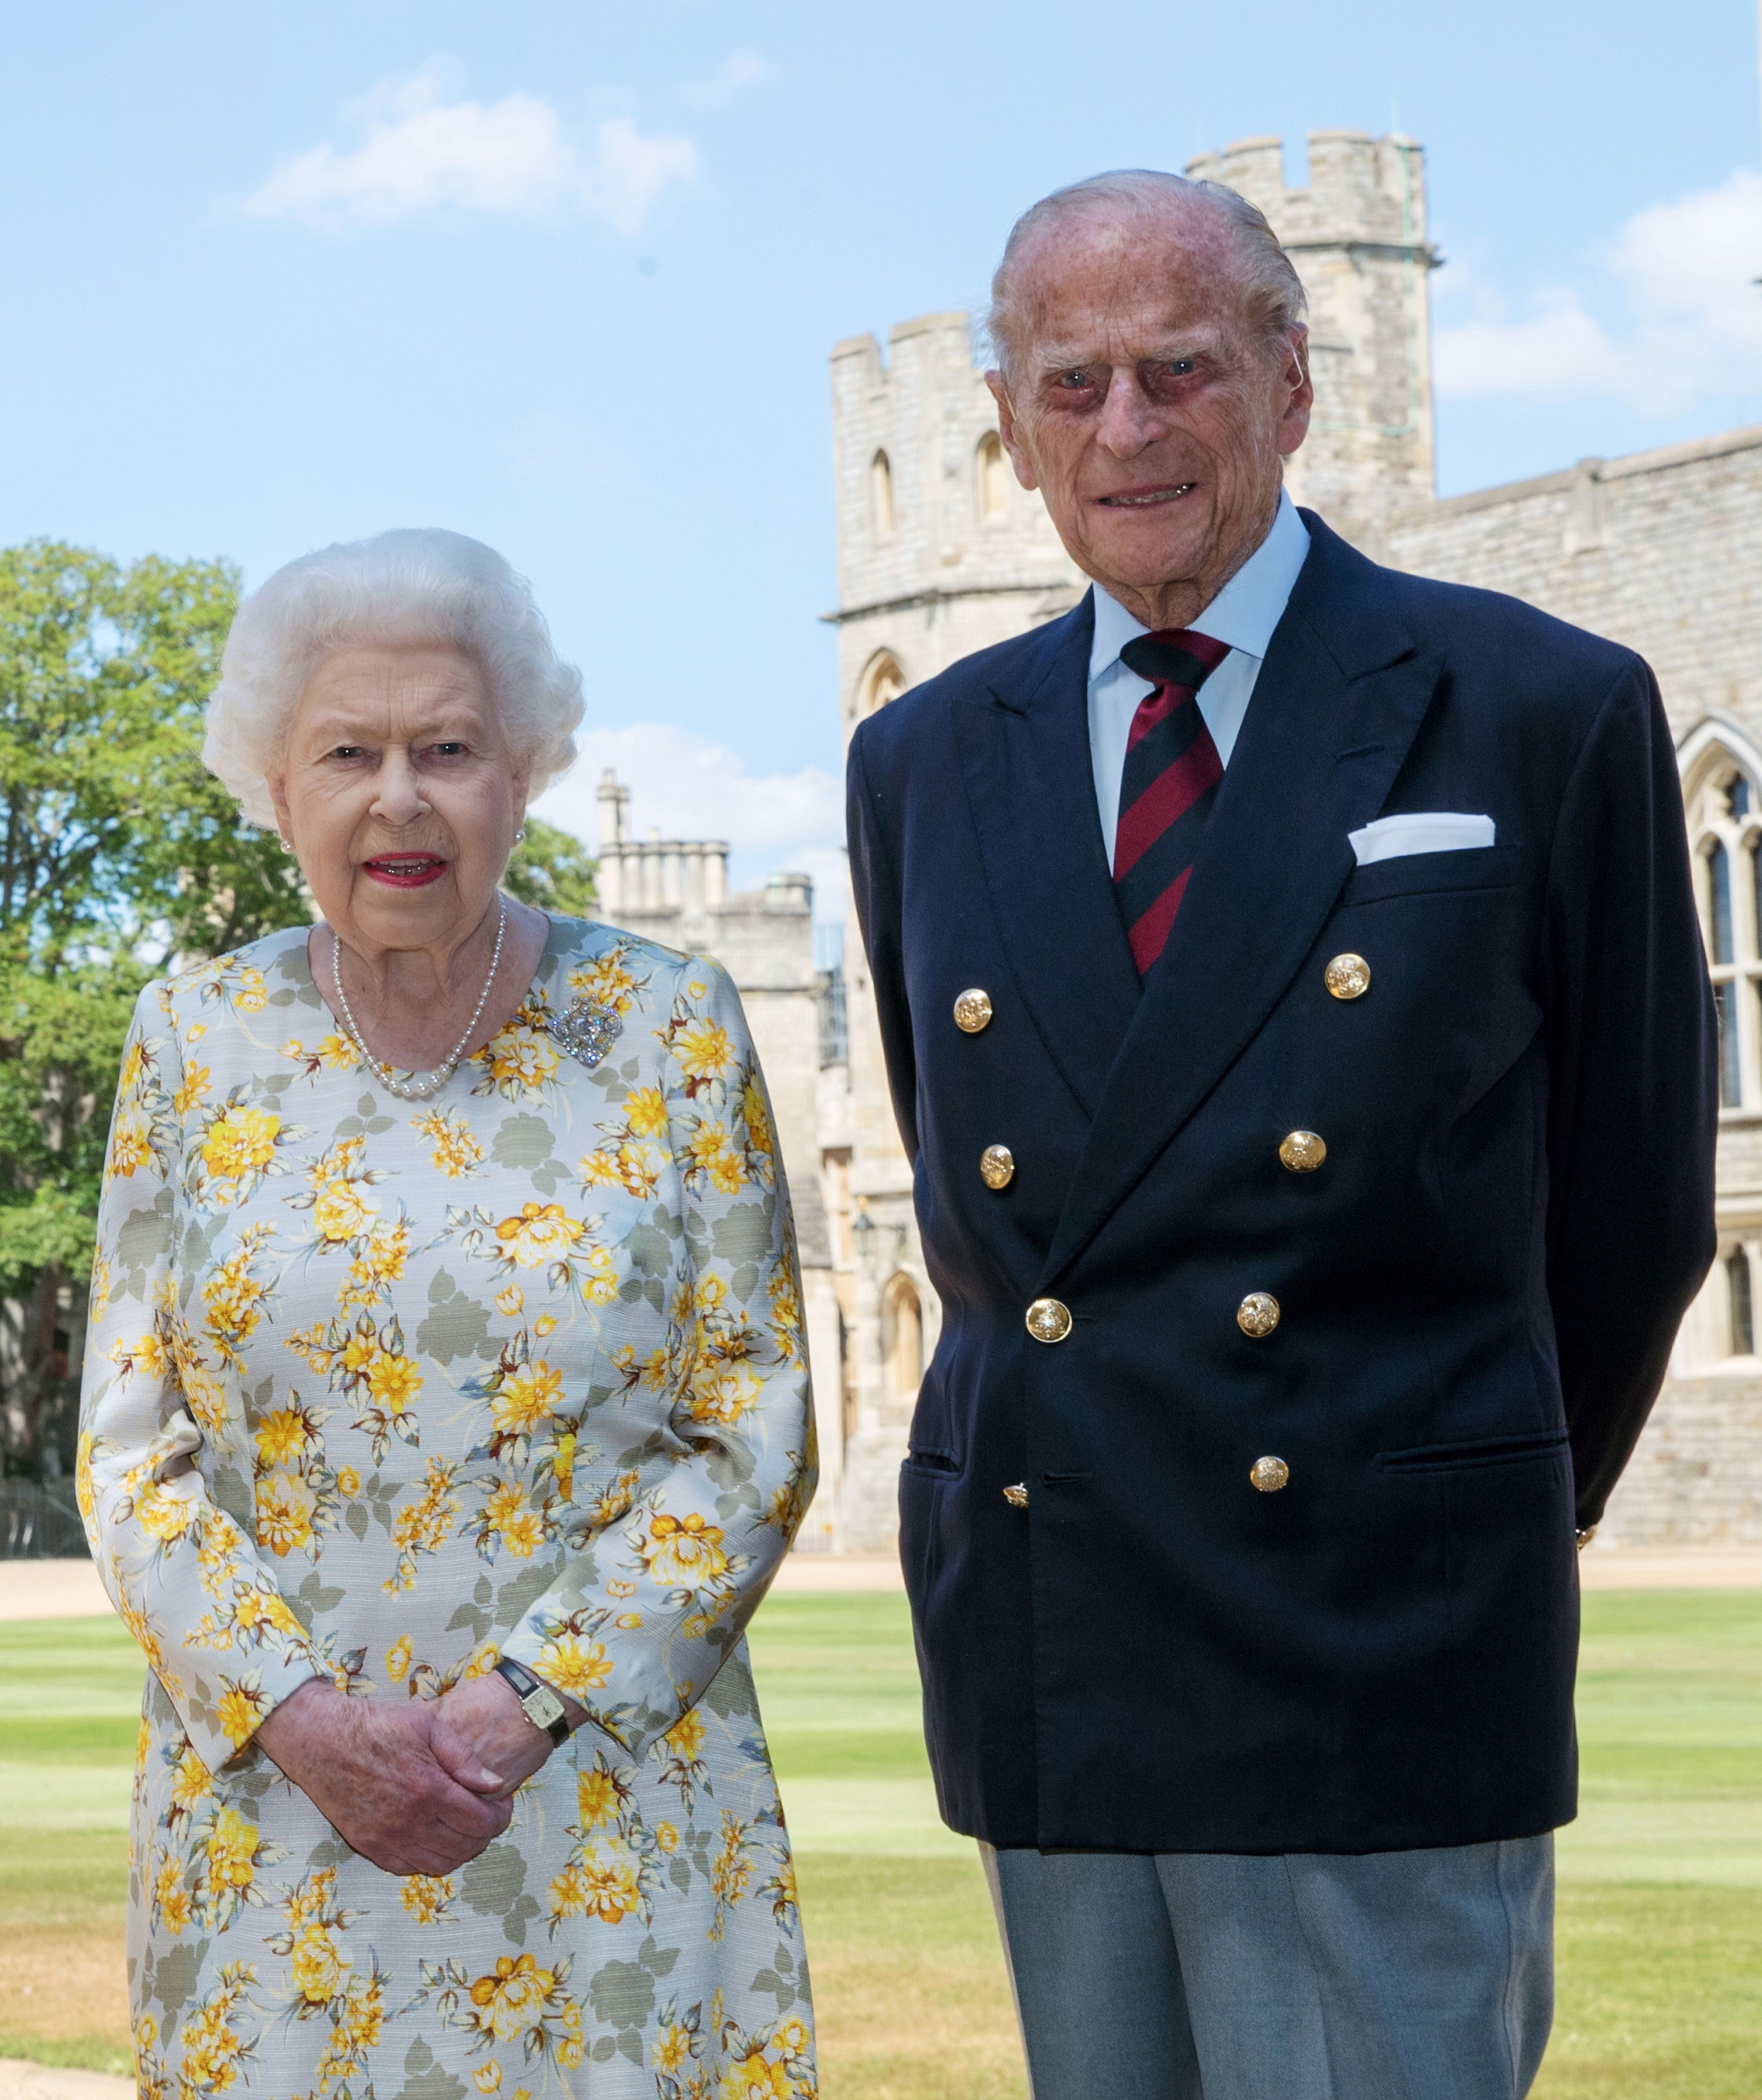 Queen Elizabth and Prince Philip in the quadrangle of Windsor Castle ahead of his 99th birthday. | Getty Images